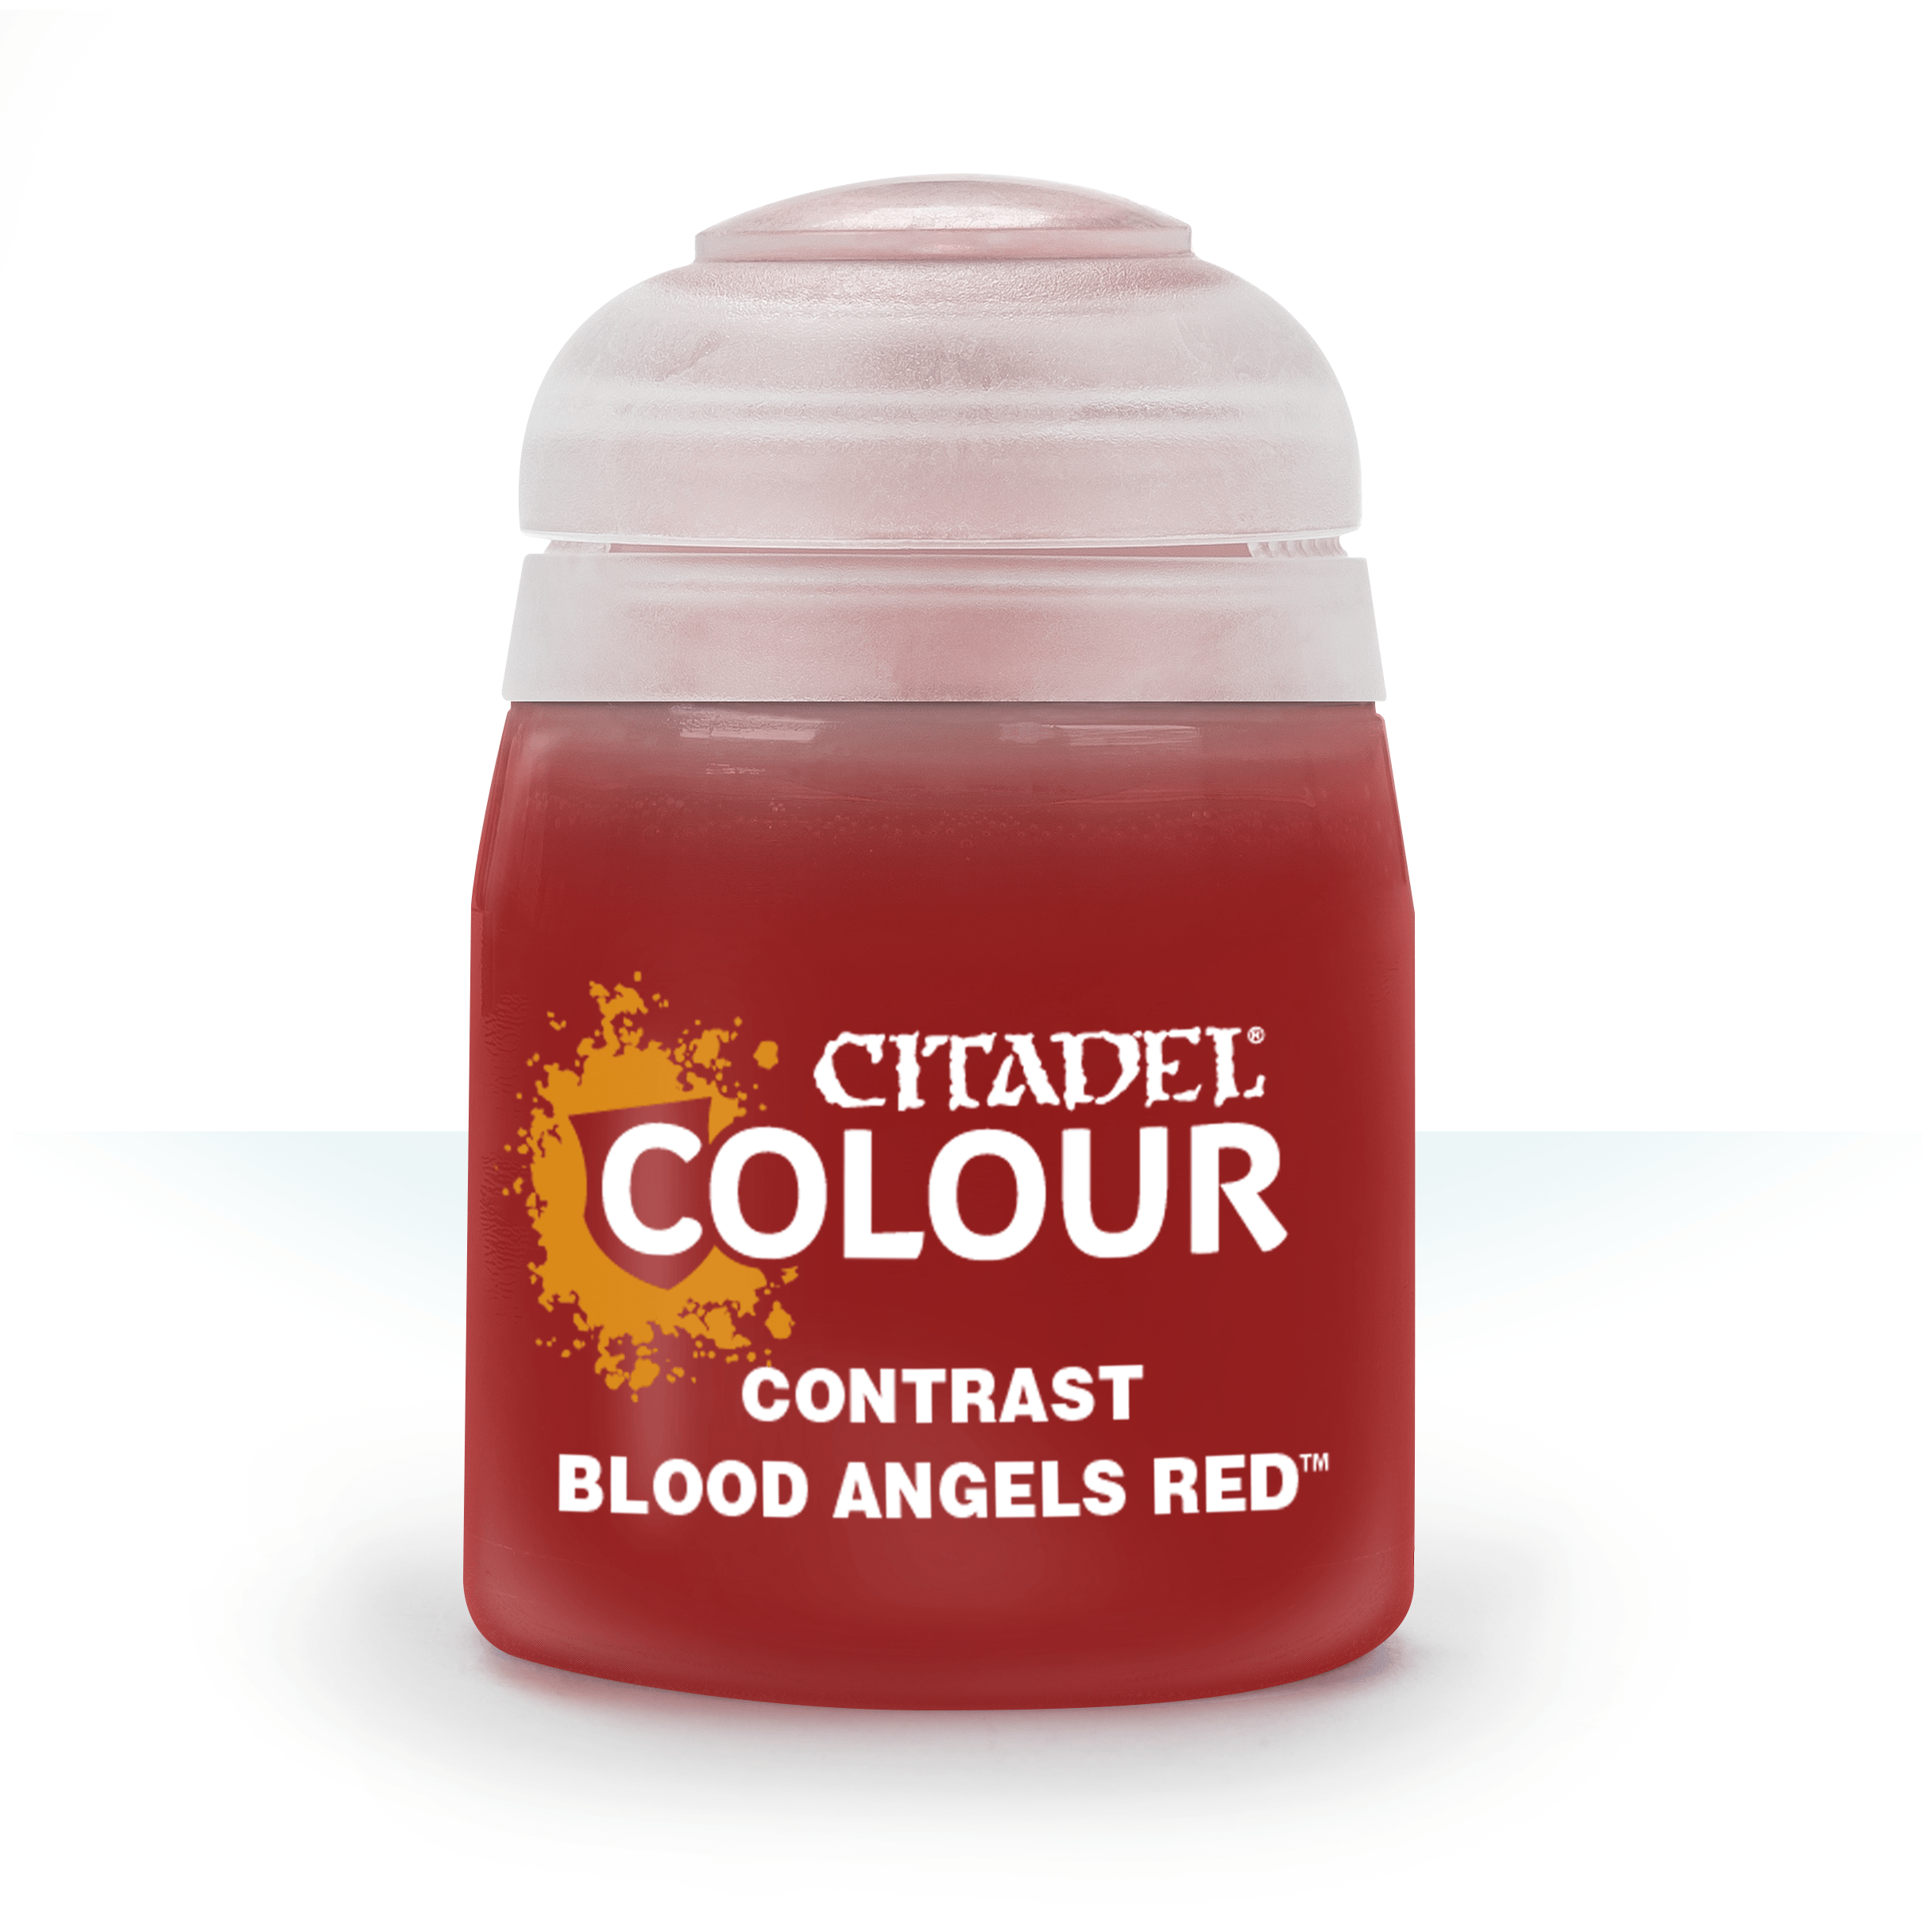 Citadel Colour: Blood Angels Red | RetroPlay Games